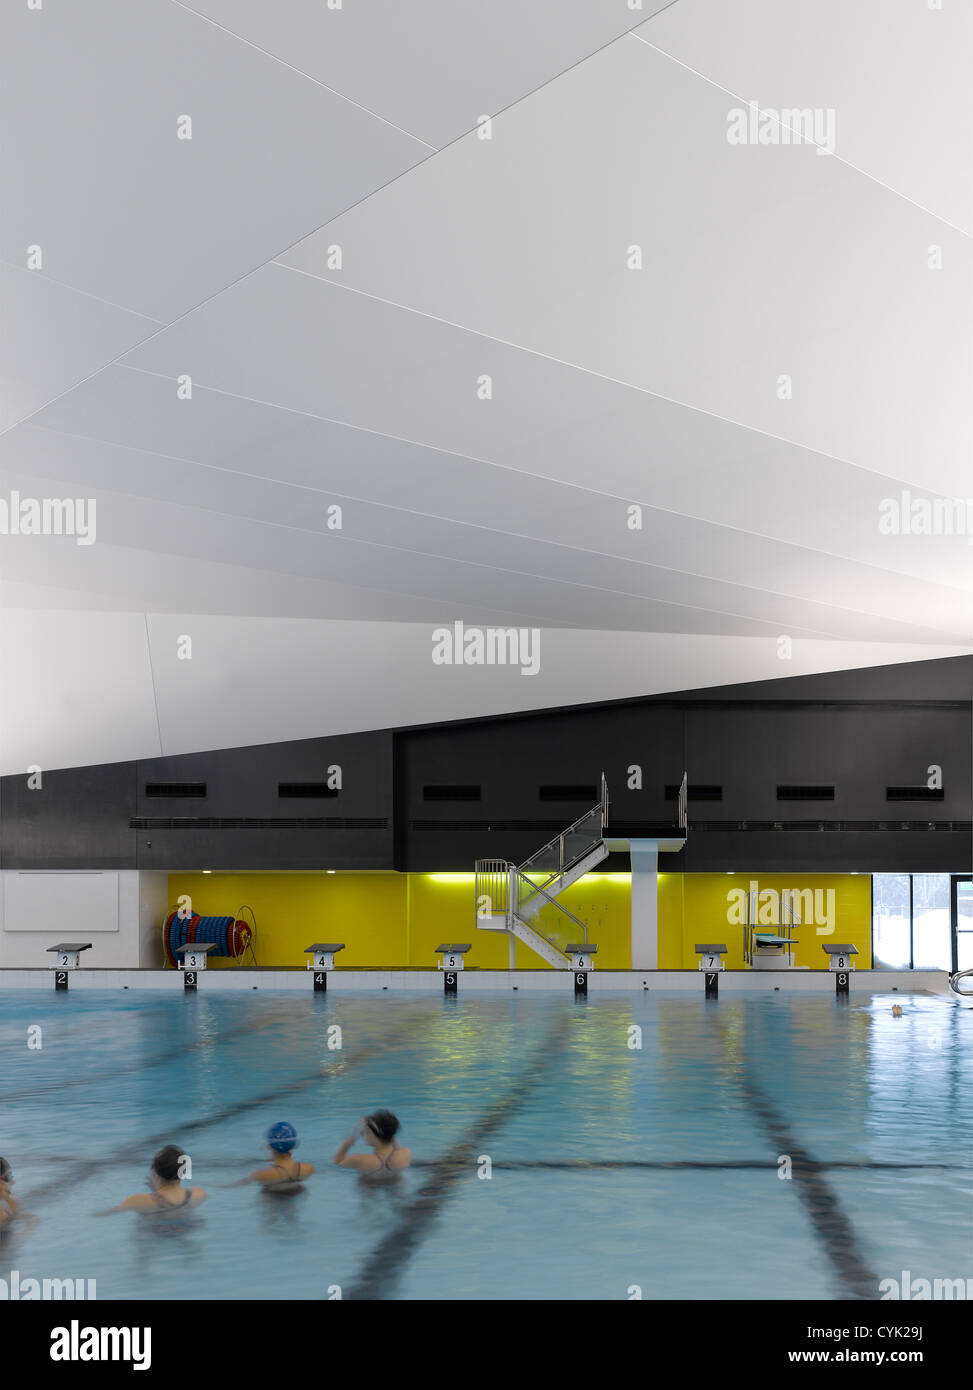 Centre Aquatique, St Hyacinthe, St Hyacinthe, Canada. Architect: acdf* Architecture, 2012. Main competition pool, diving boards, Stock Photo